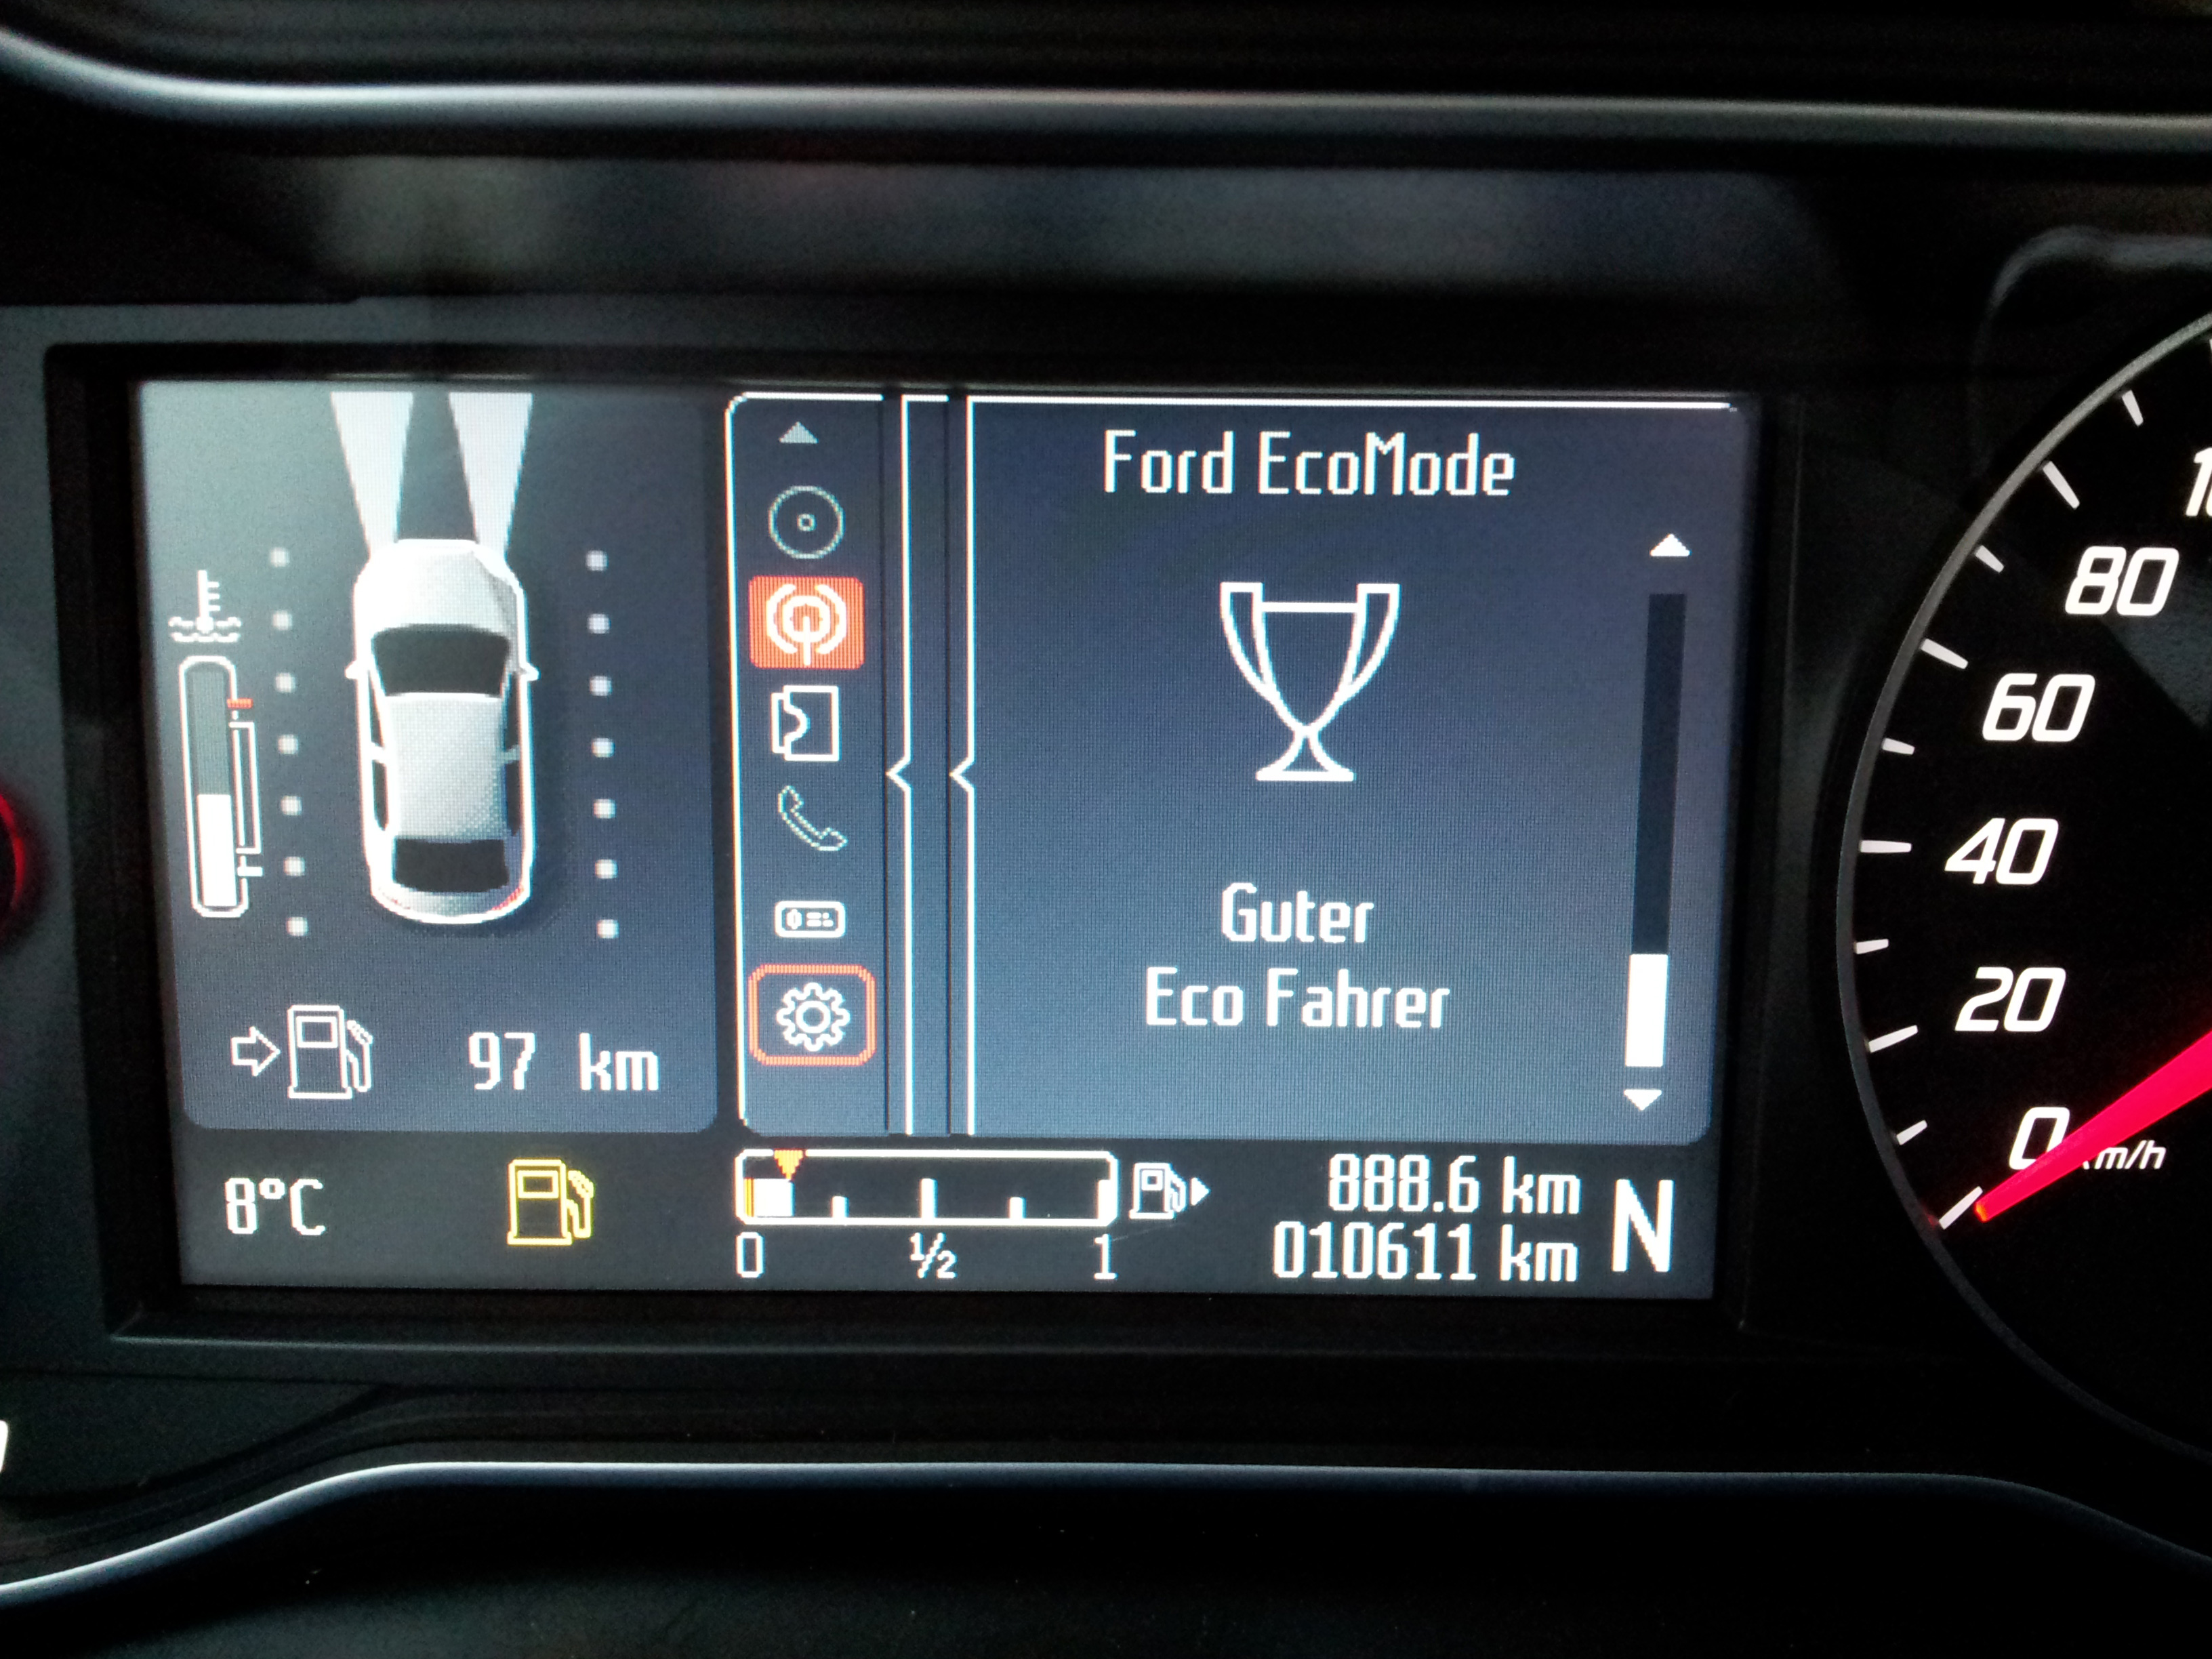 Ford Eco Mode was sagen eure Blümchen? Ford GALAXY